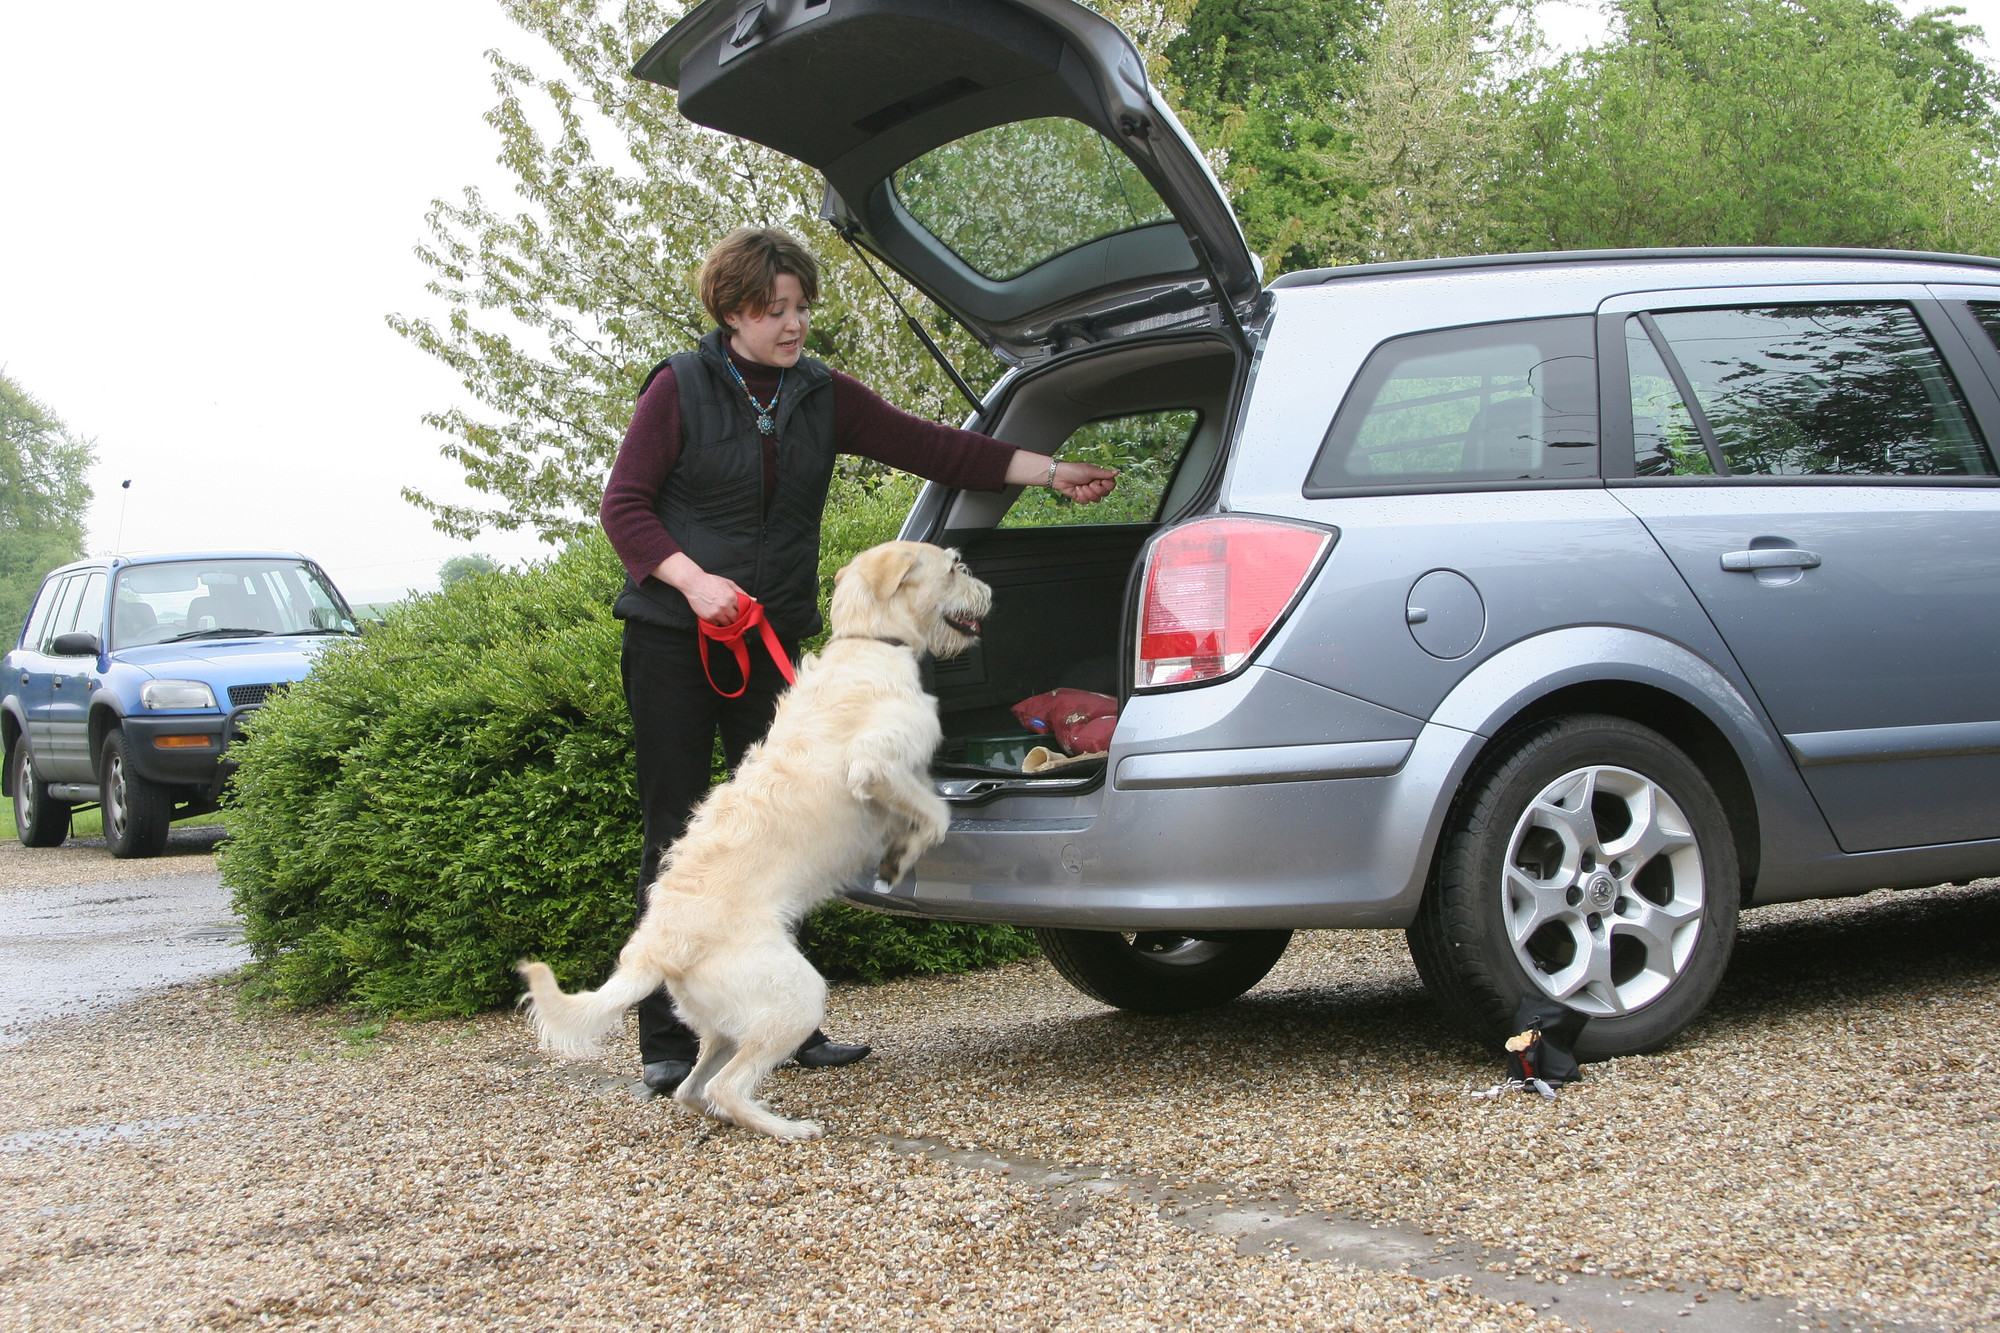 Dog jumping into boot of car with owner guiding them in